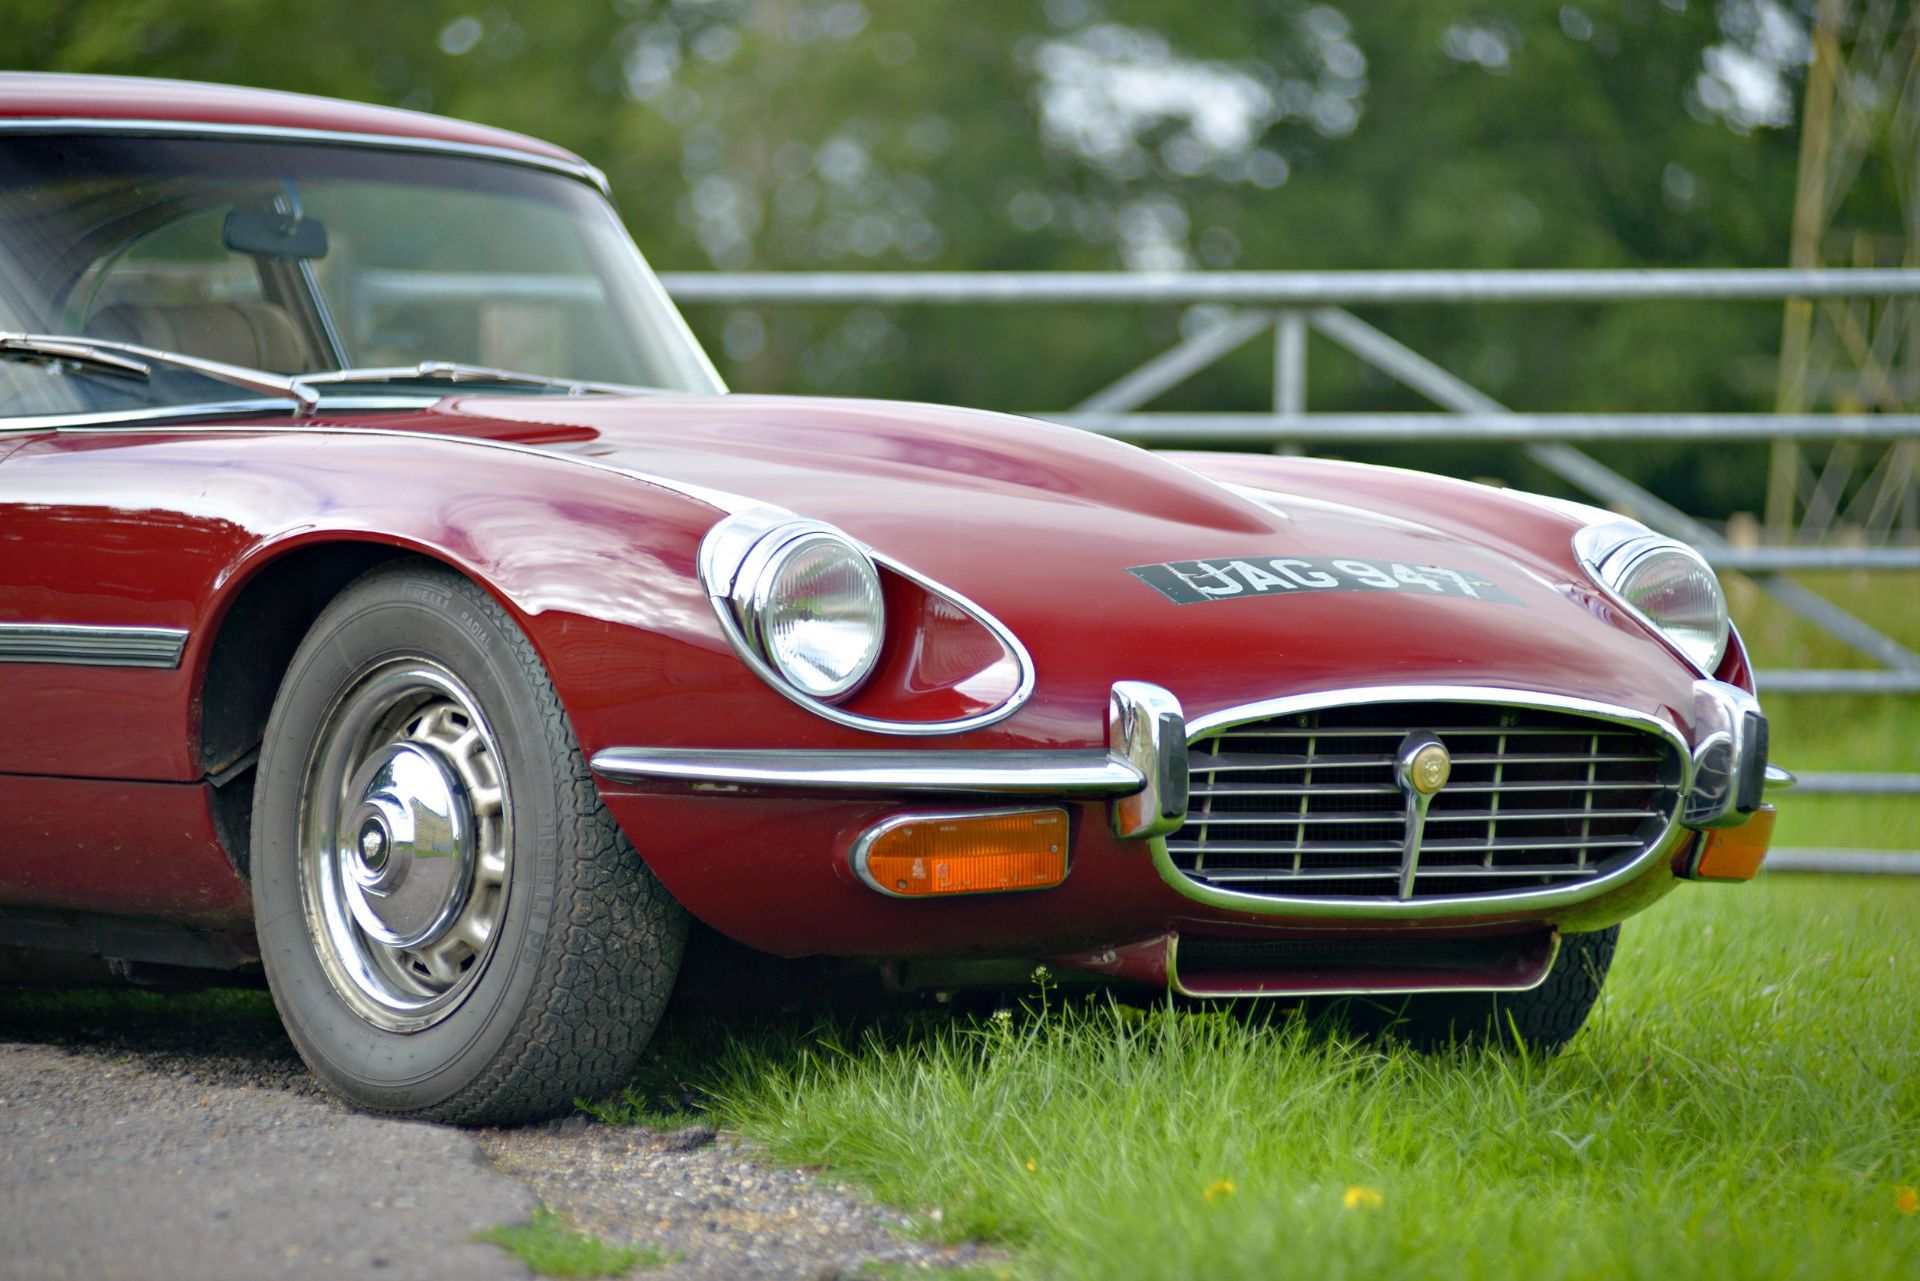 1972 JAGUAR E-TYPE SERIES III FIXED HEAD COUPE Registration: JAG 947 - Image 9 of 36